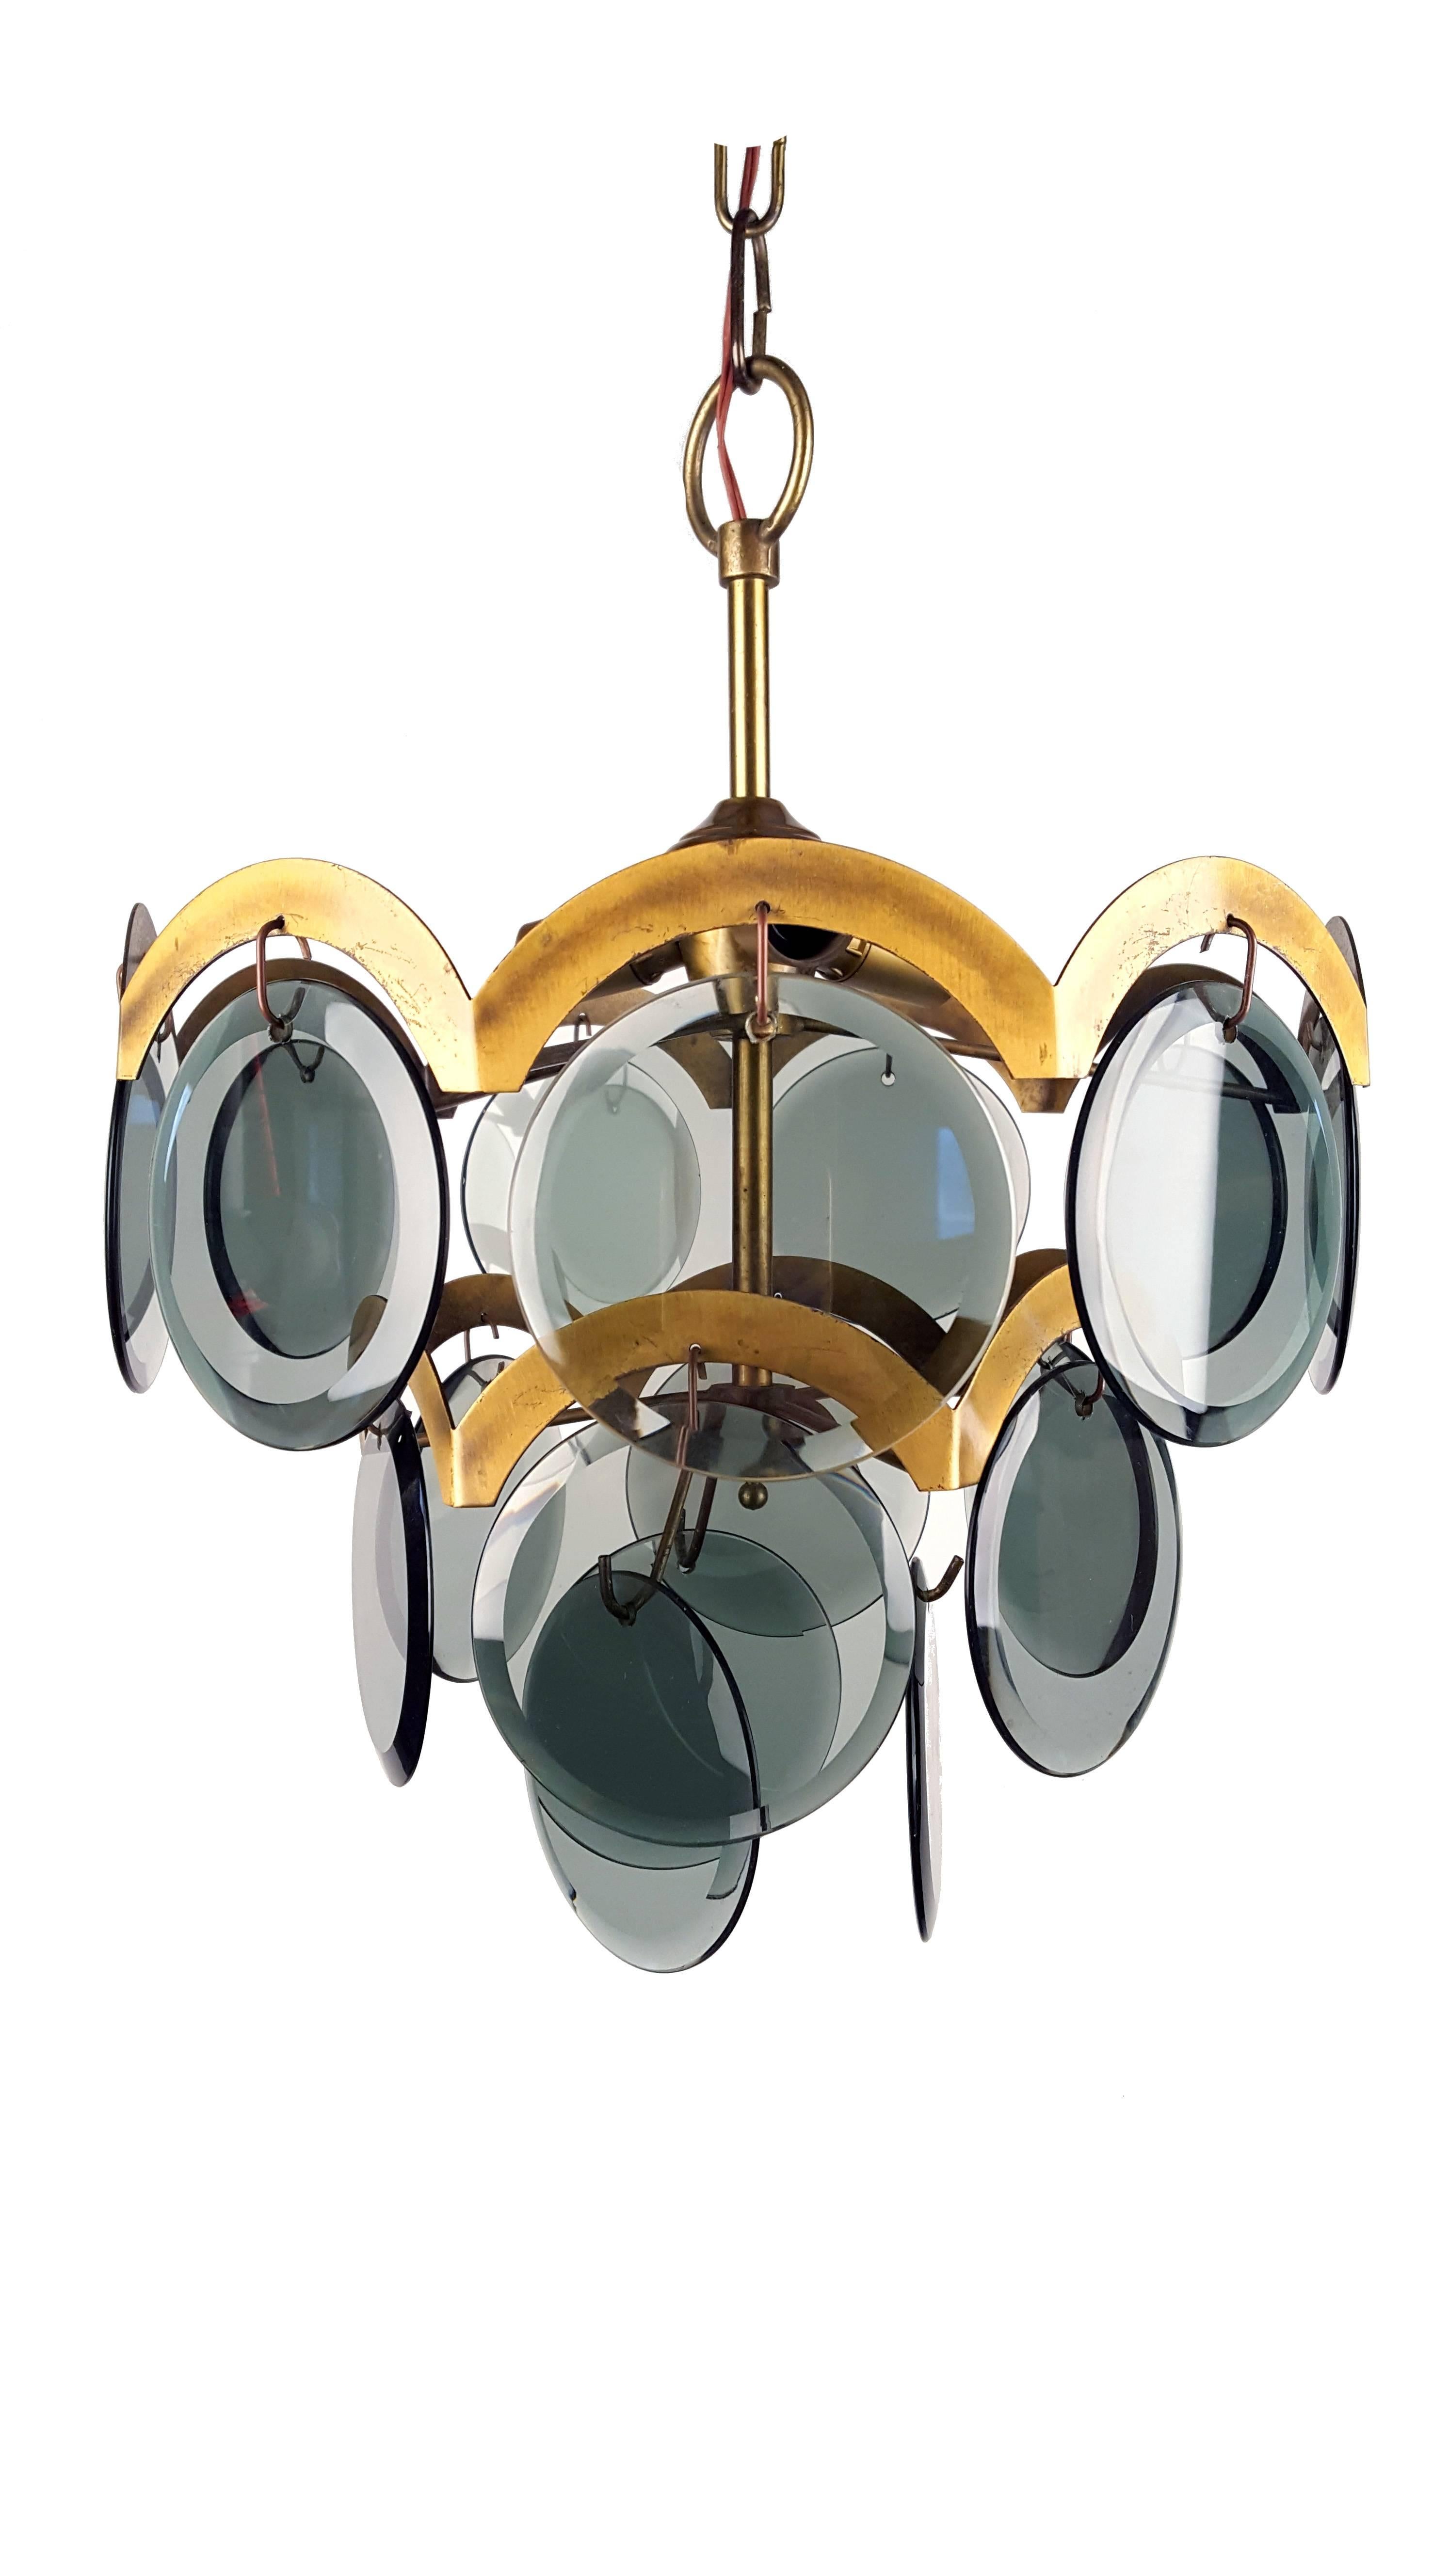 Gino Vistosi Italian Mid-Century Modern smoked blue glass beveled disc and brass chandelier. Glass discs disposed in three rows. Three sockets for bulbs.

Measures: Height 35 cm (without chain)/13.8 inch.
Diameter 35 cm / 13.8 inch.
Diameter